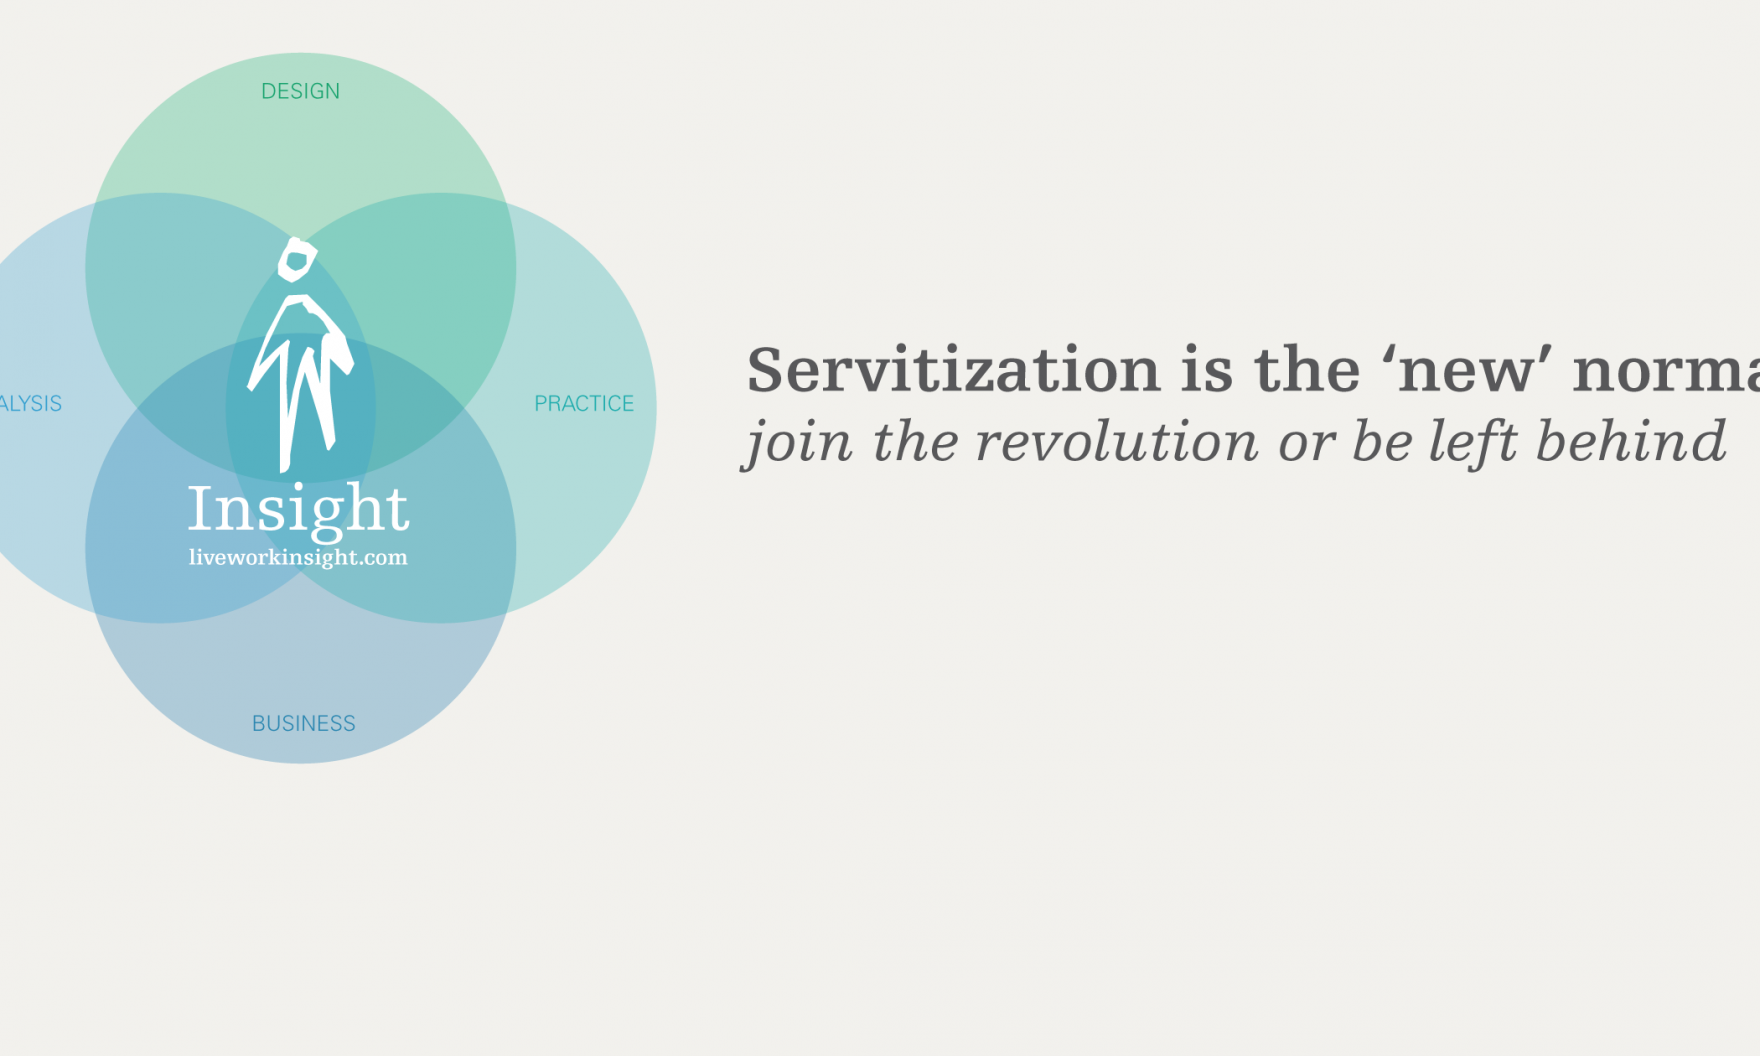 Get a sneak preview into the wonderful world of servitization. *Invitation only*